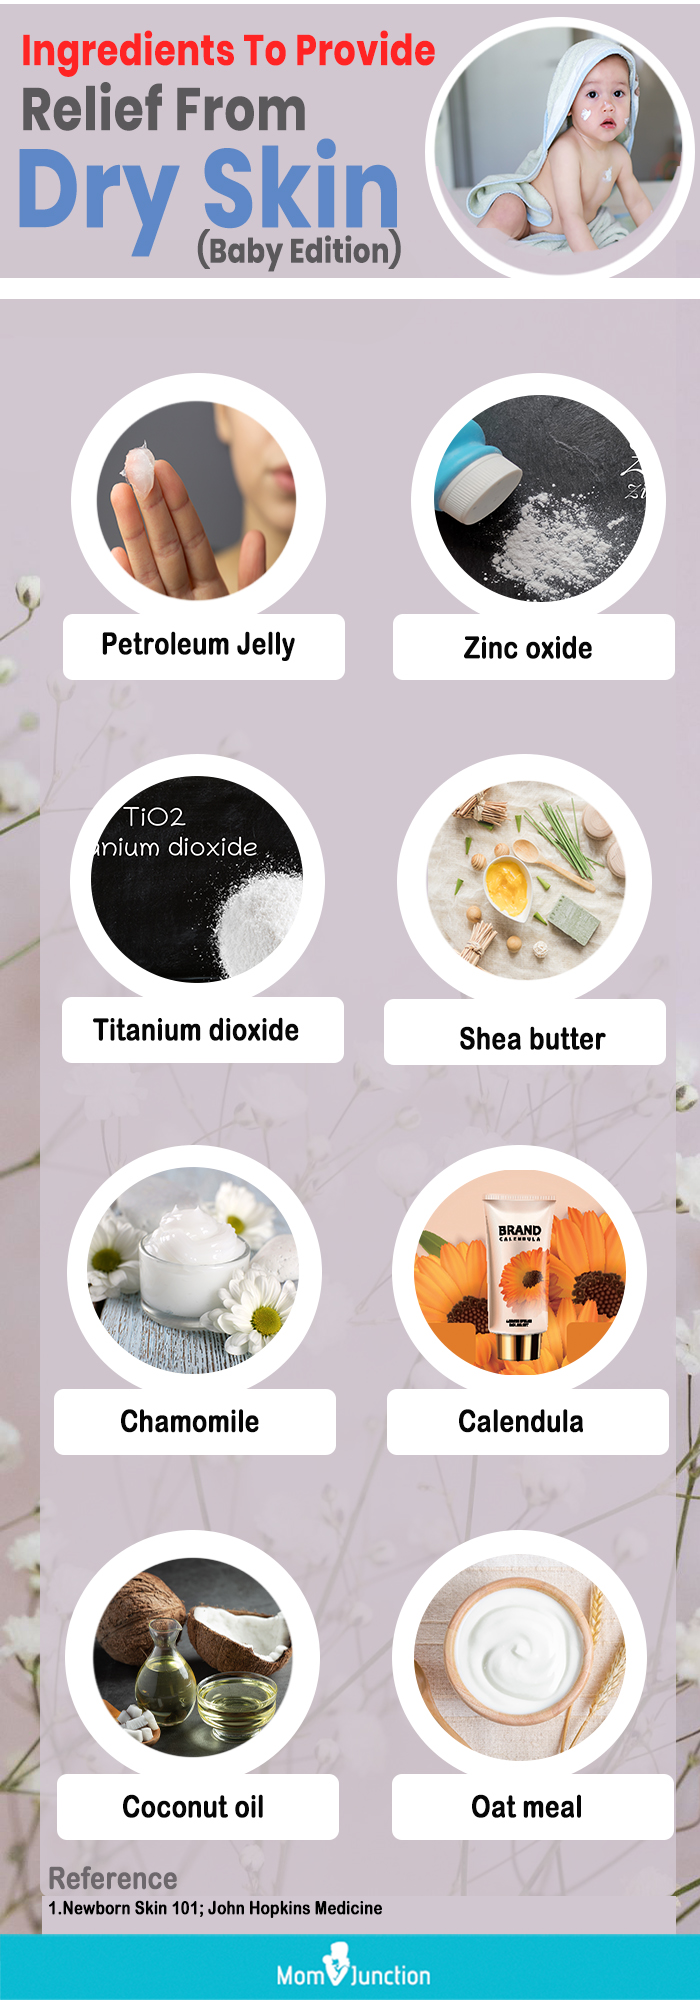 ingredients to manage your baby’s dry skin (infographic)